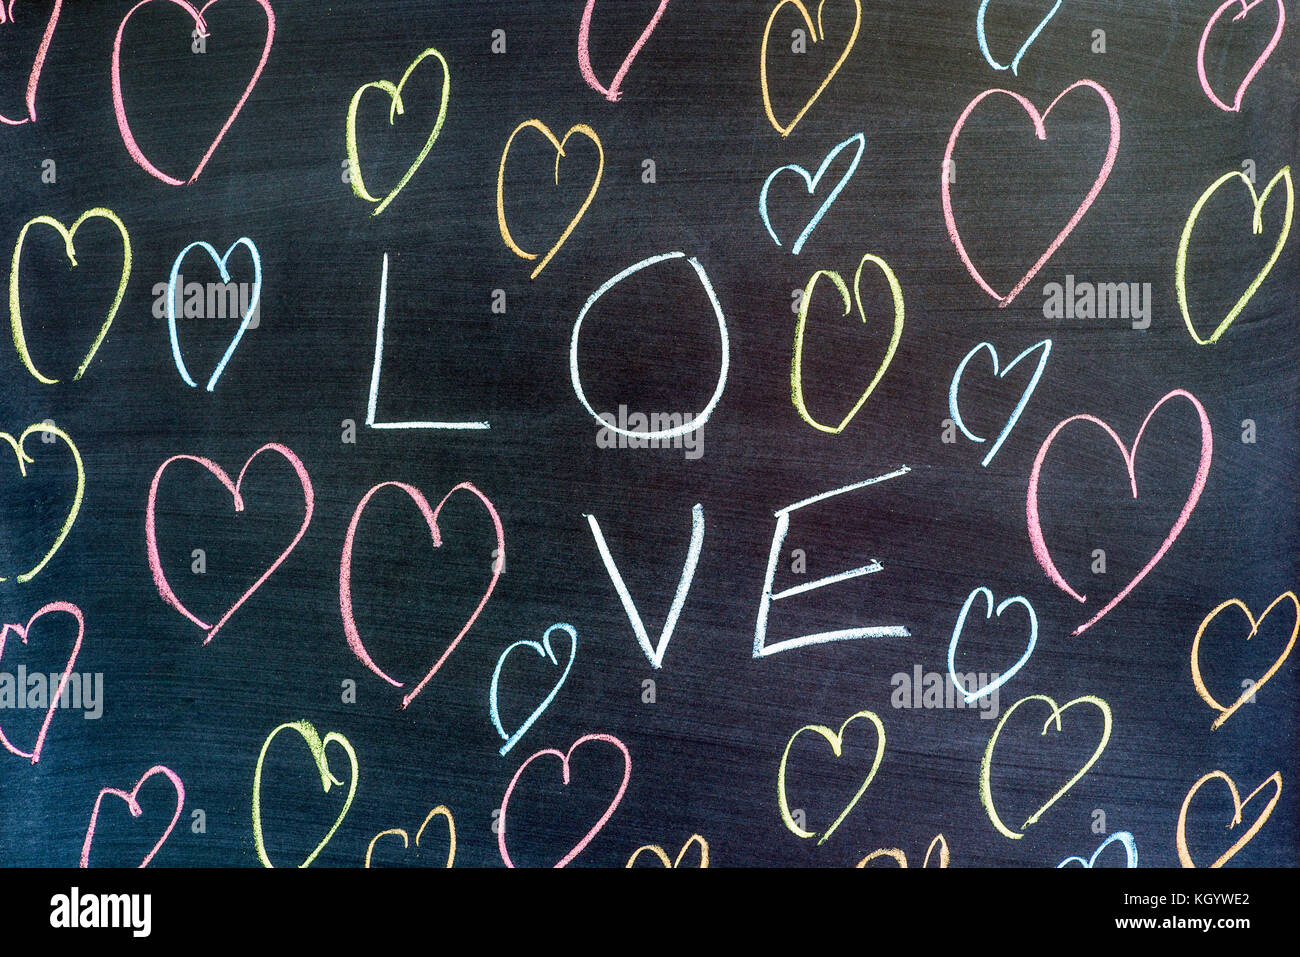 The word LOVE and heart shapes on dark colored background. Stock Photo